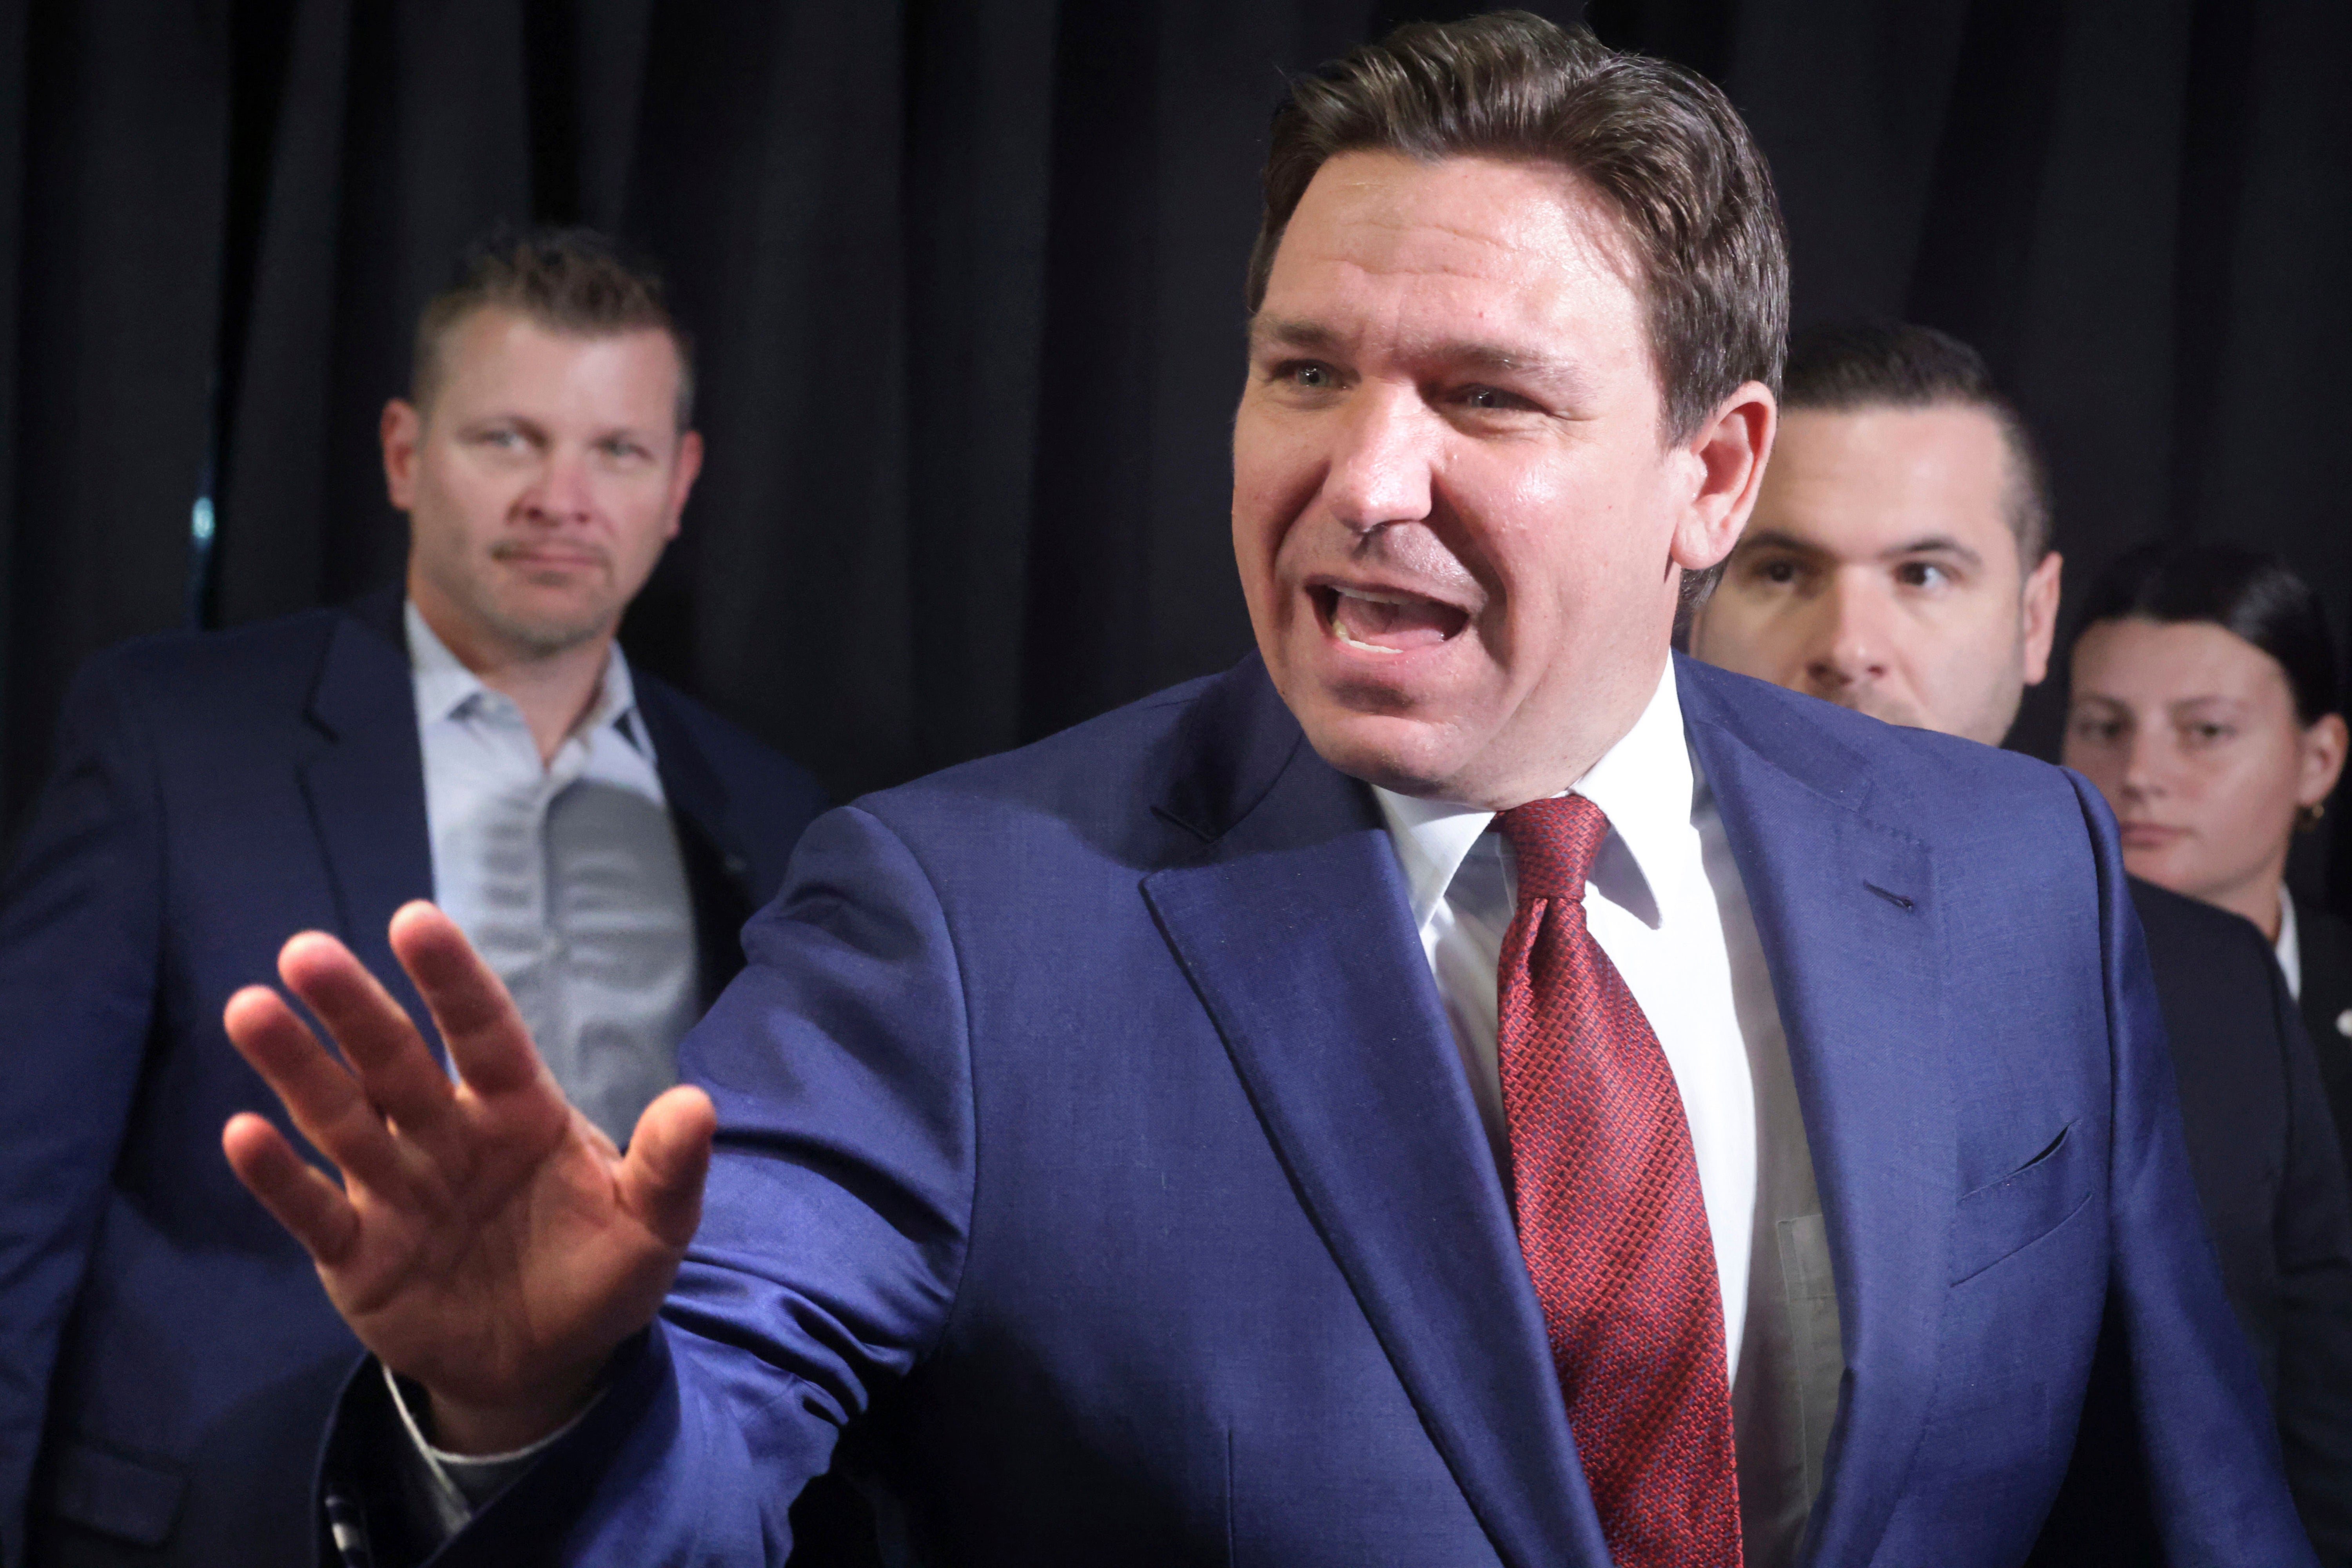 Ron DeSantis, the governor of Florida, won re-election by 20 points in 2022 after a narrow victory four years prior